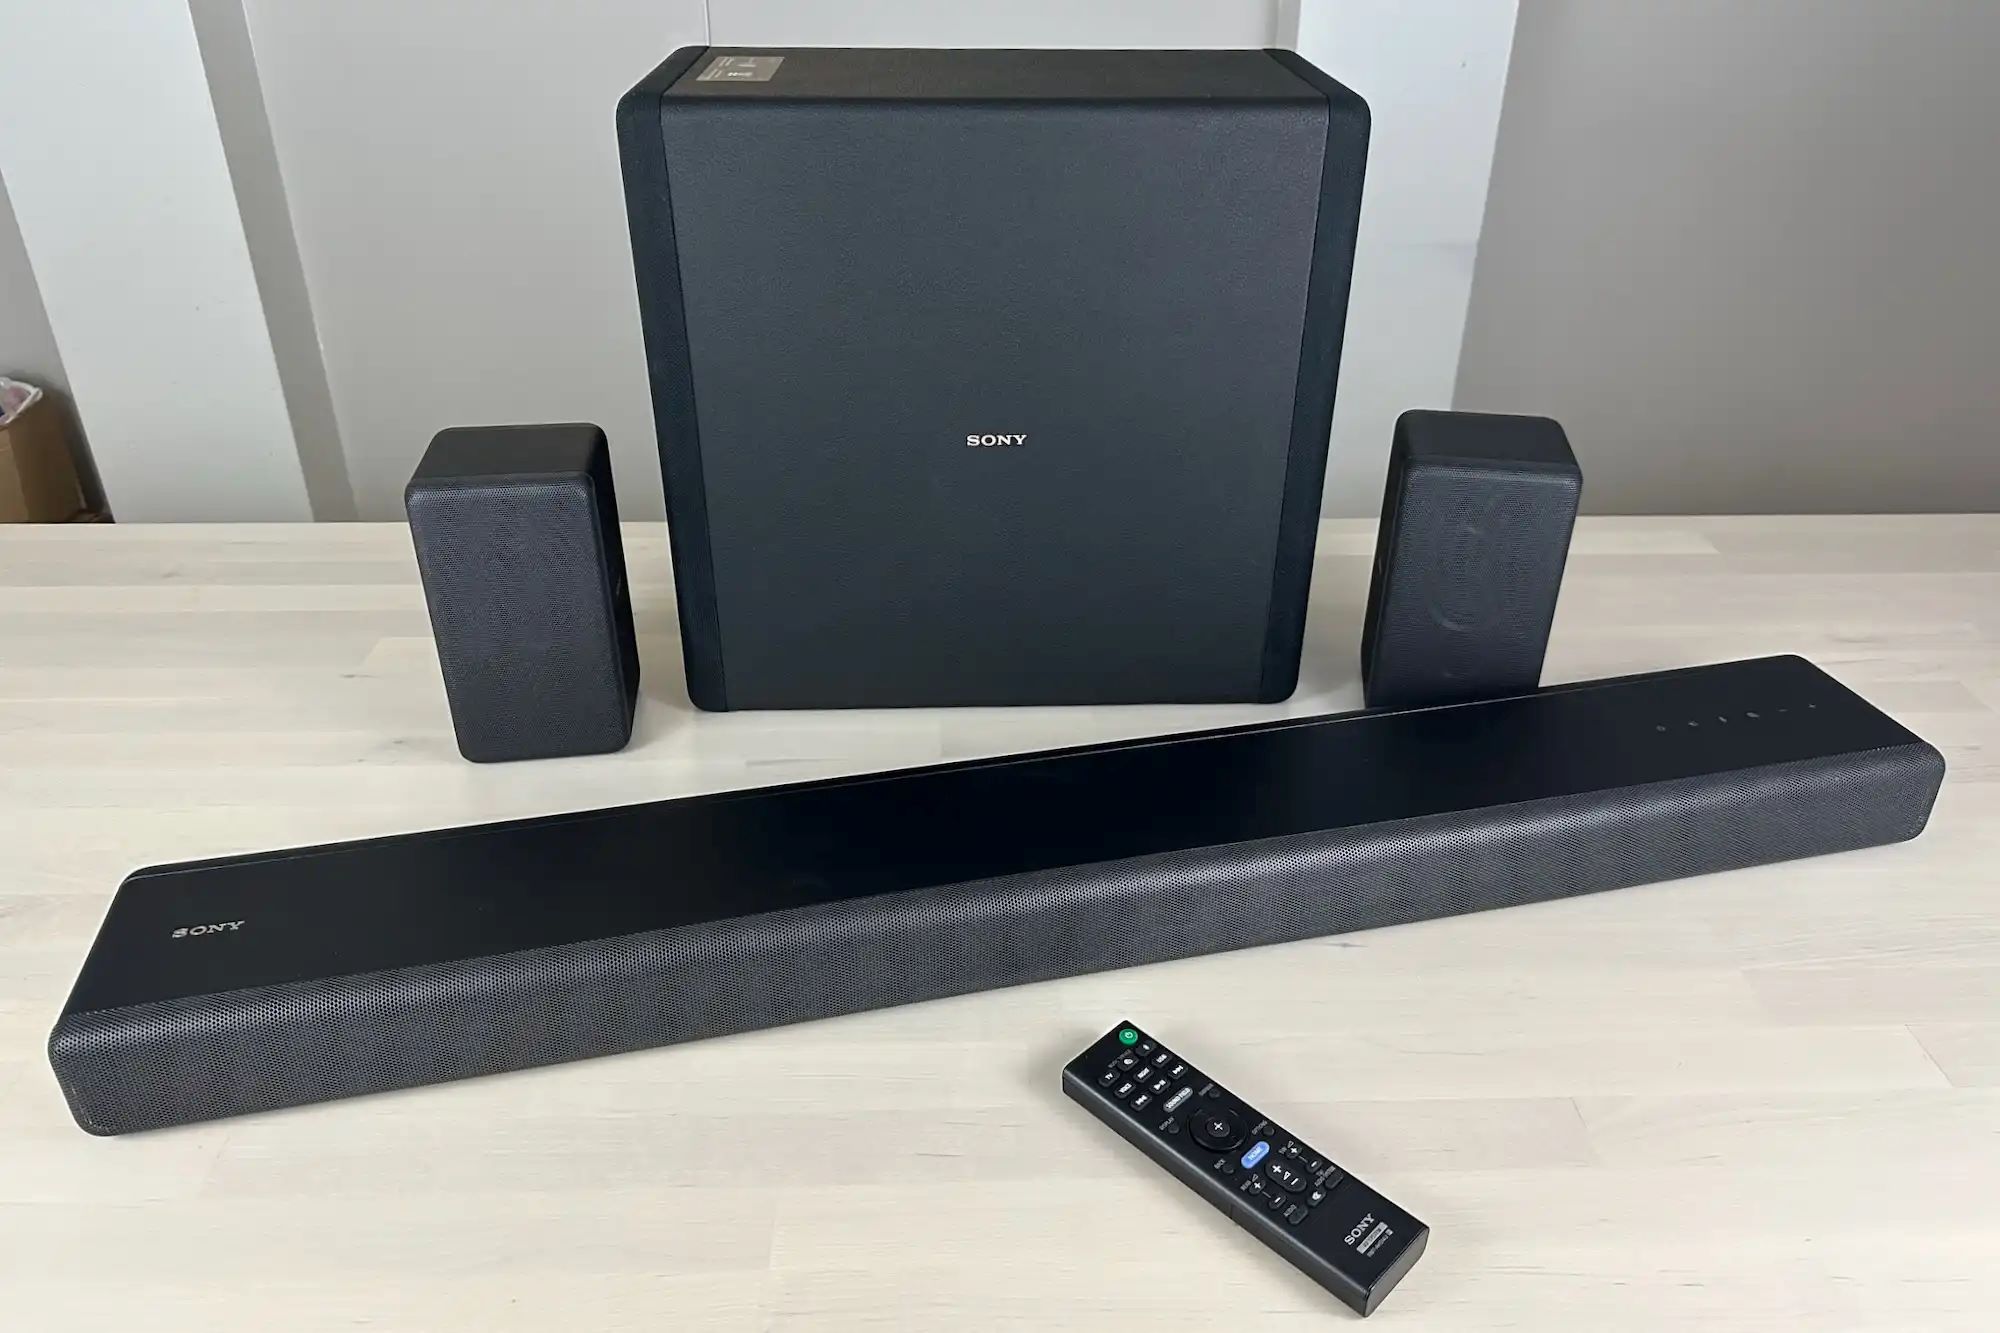 How To Reset Sony Subwoofer